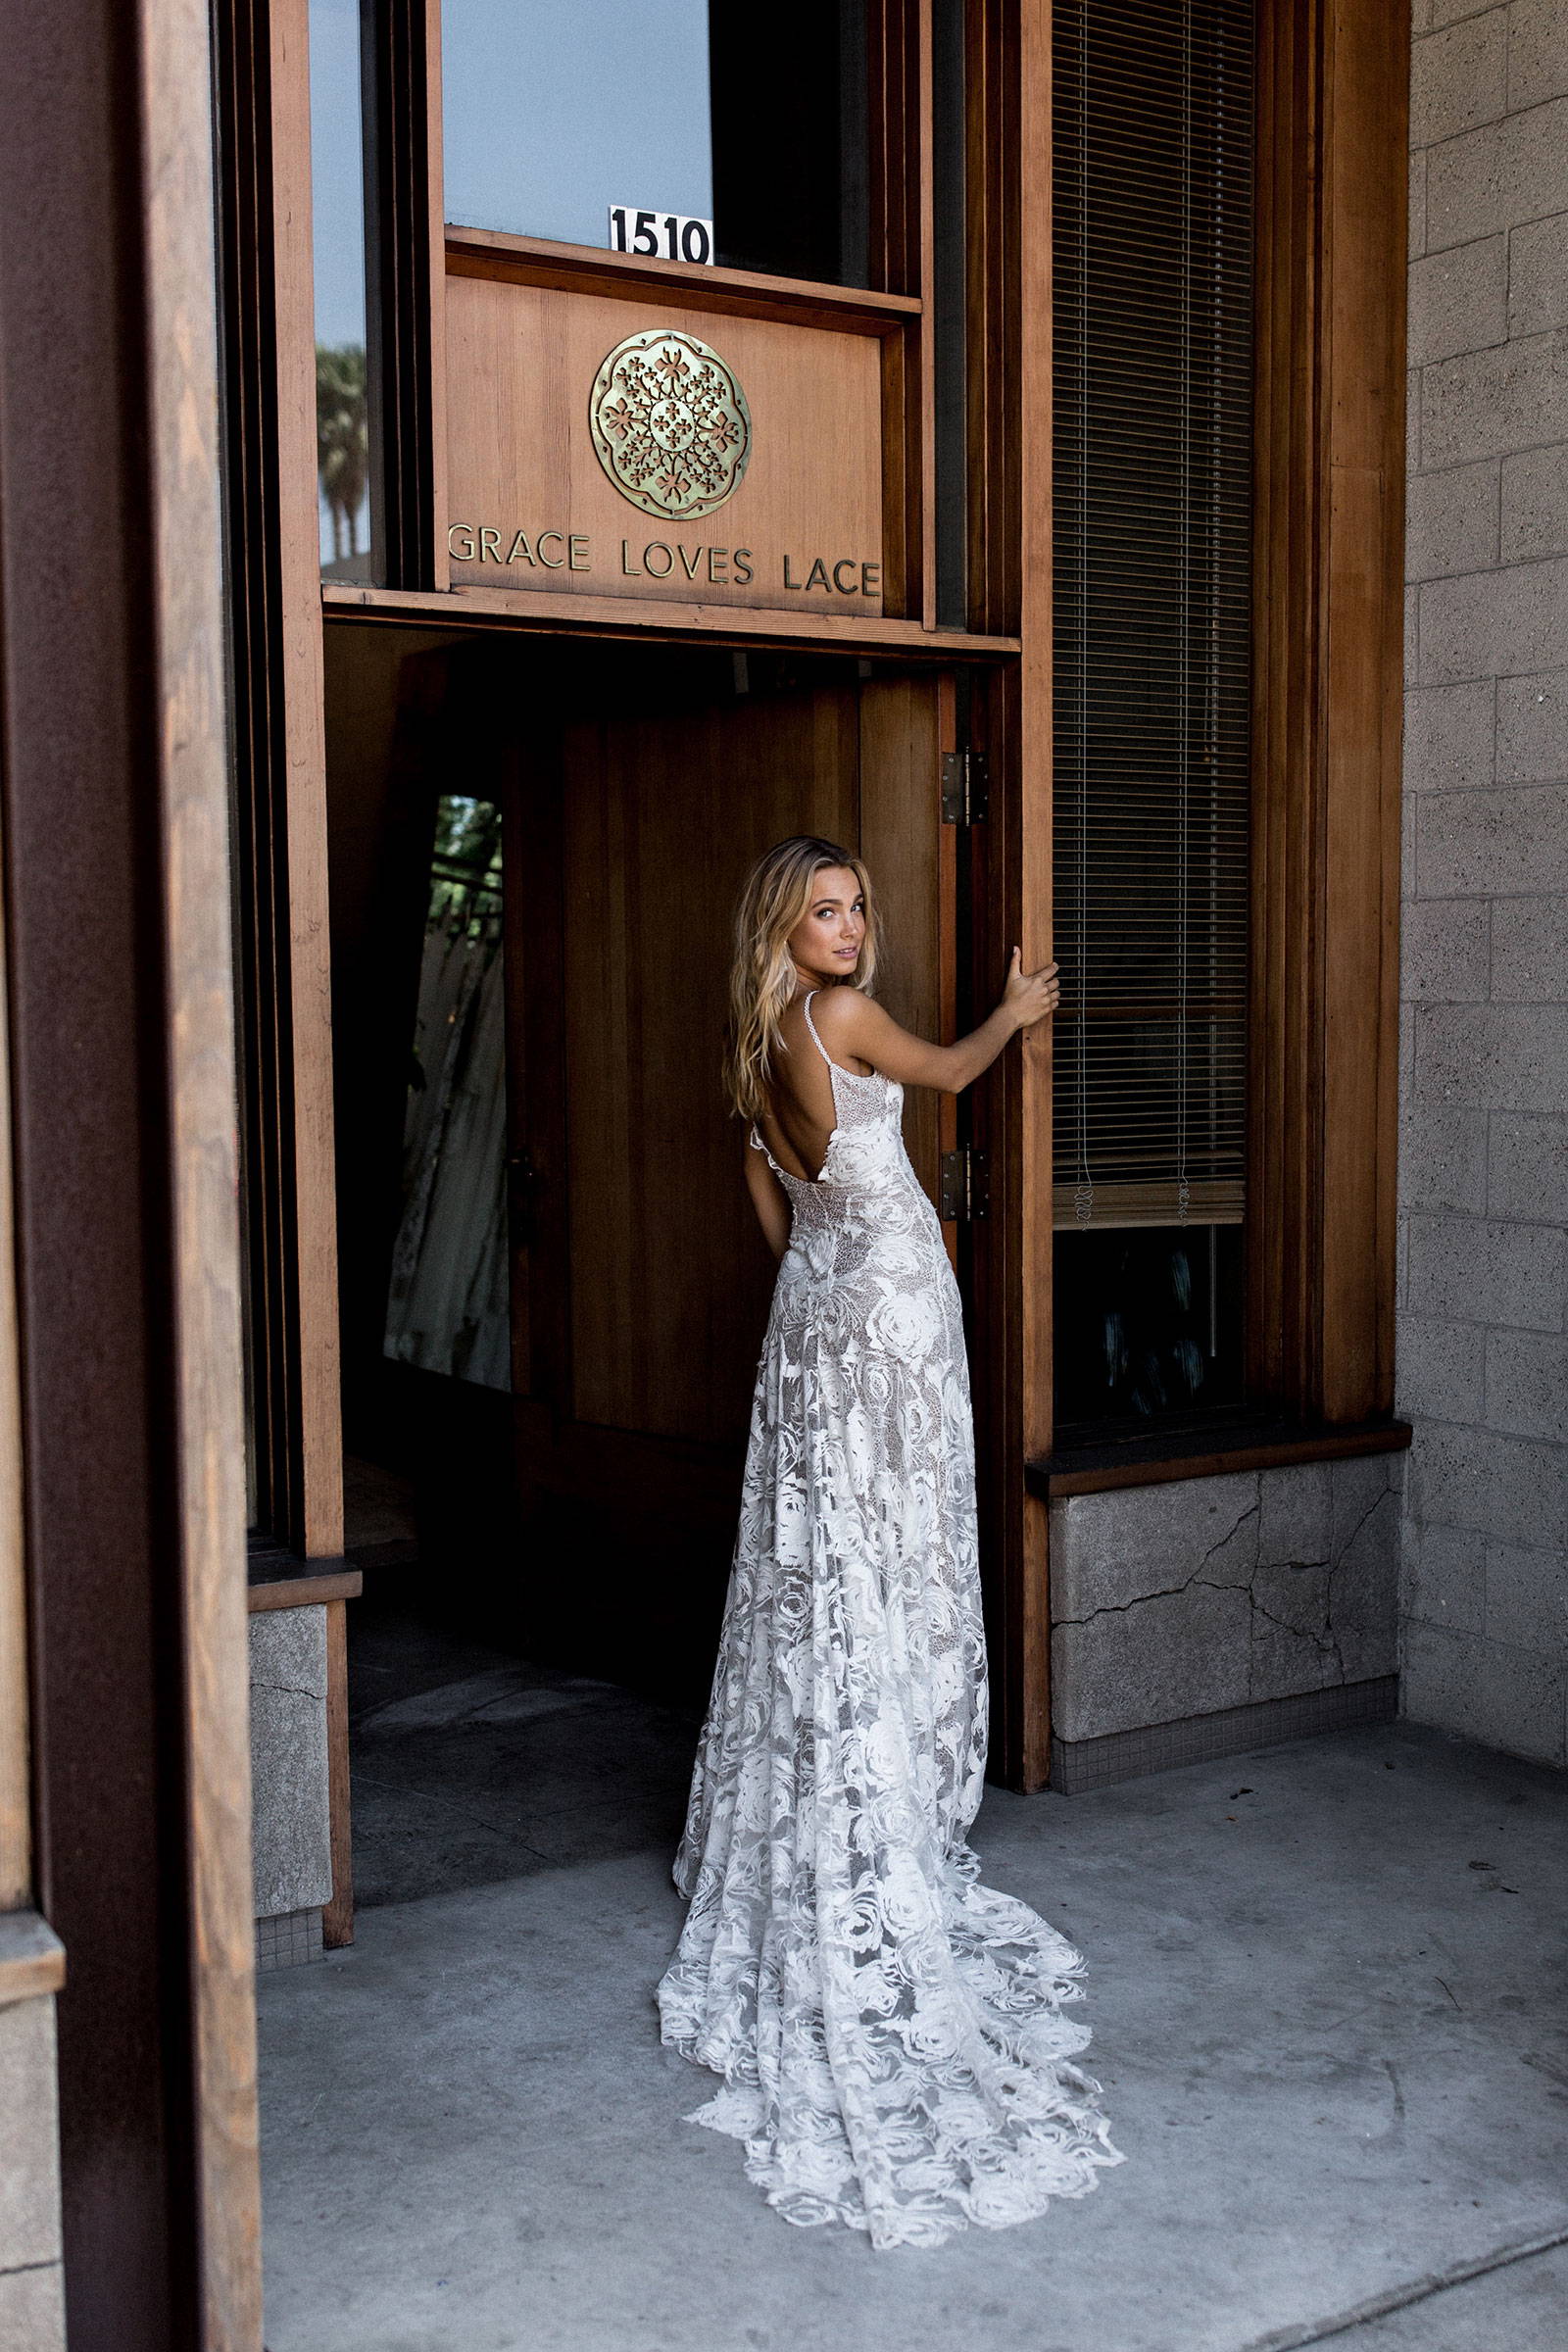 Grace Loves Lace bride wearing the Rosa wedding dress at the Los Angeles showroom entrance